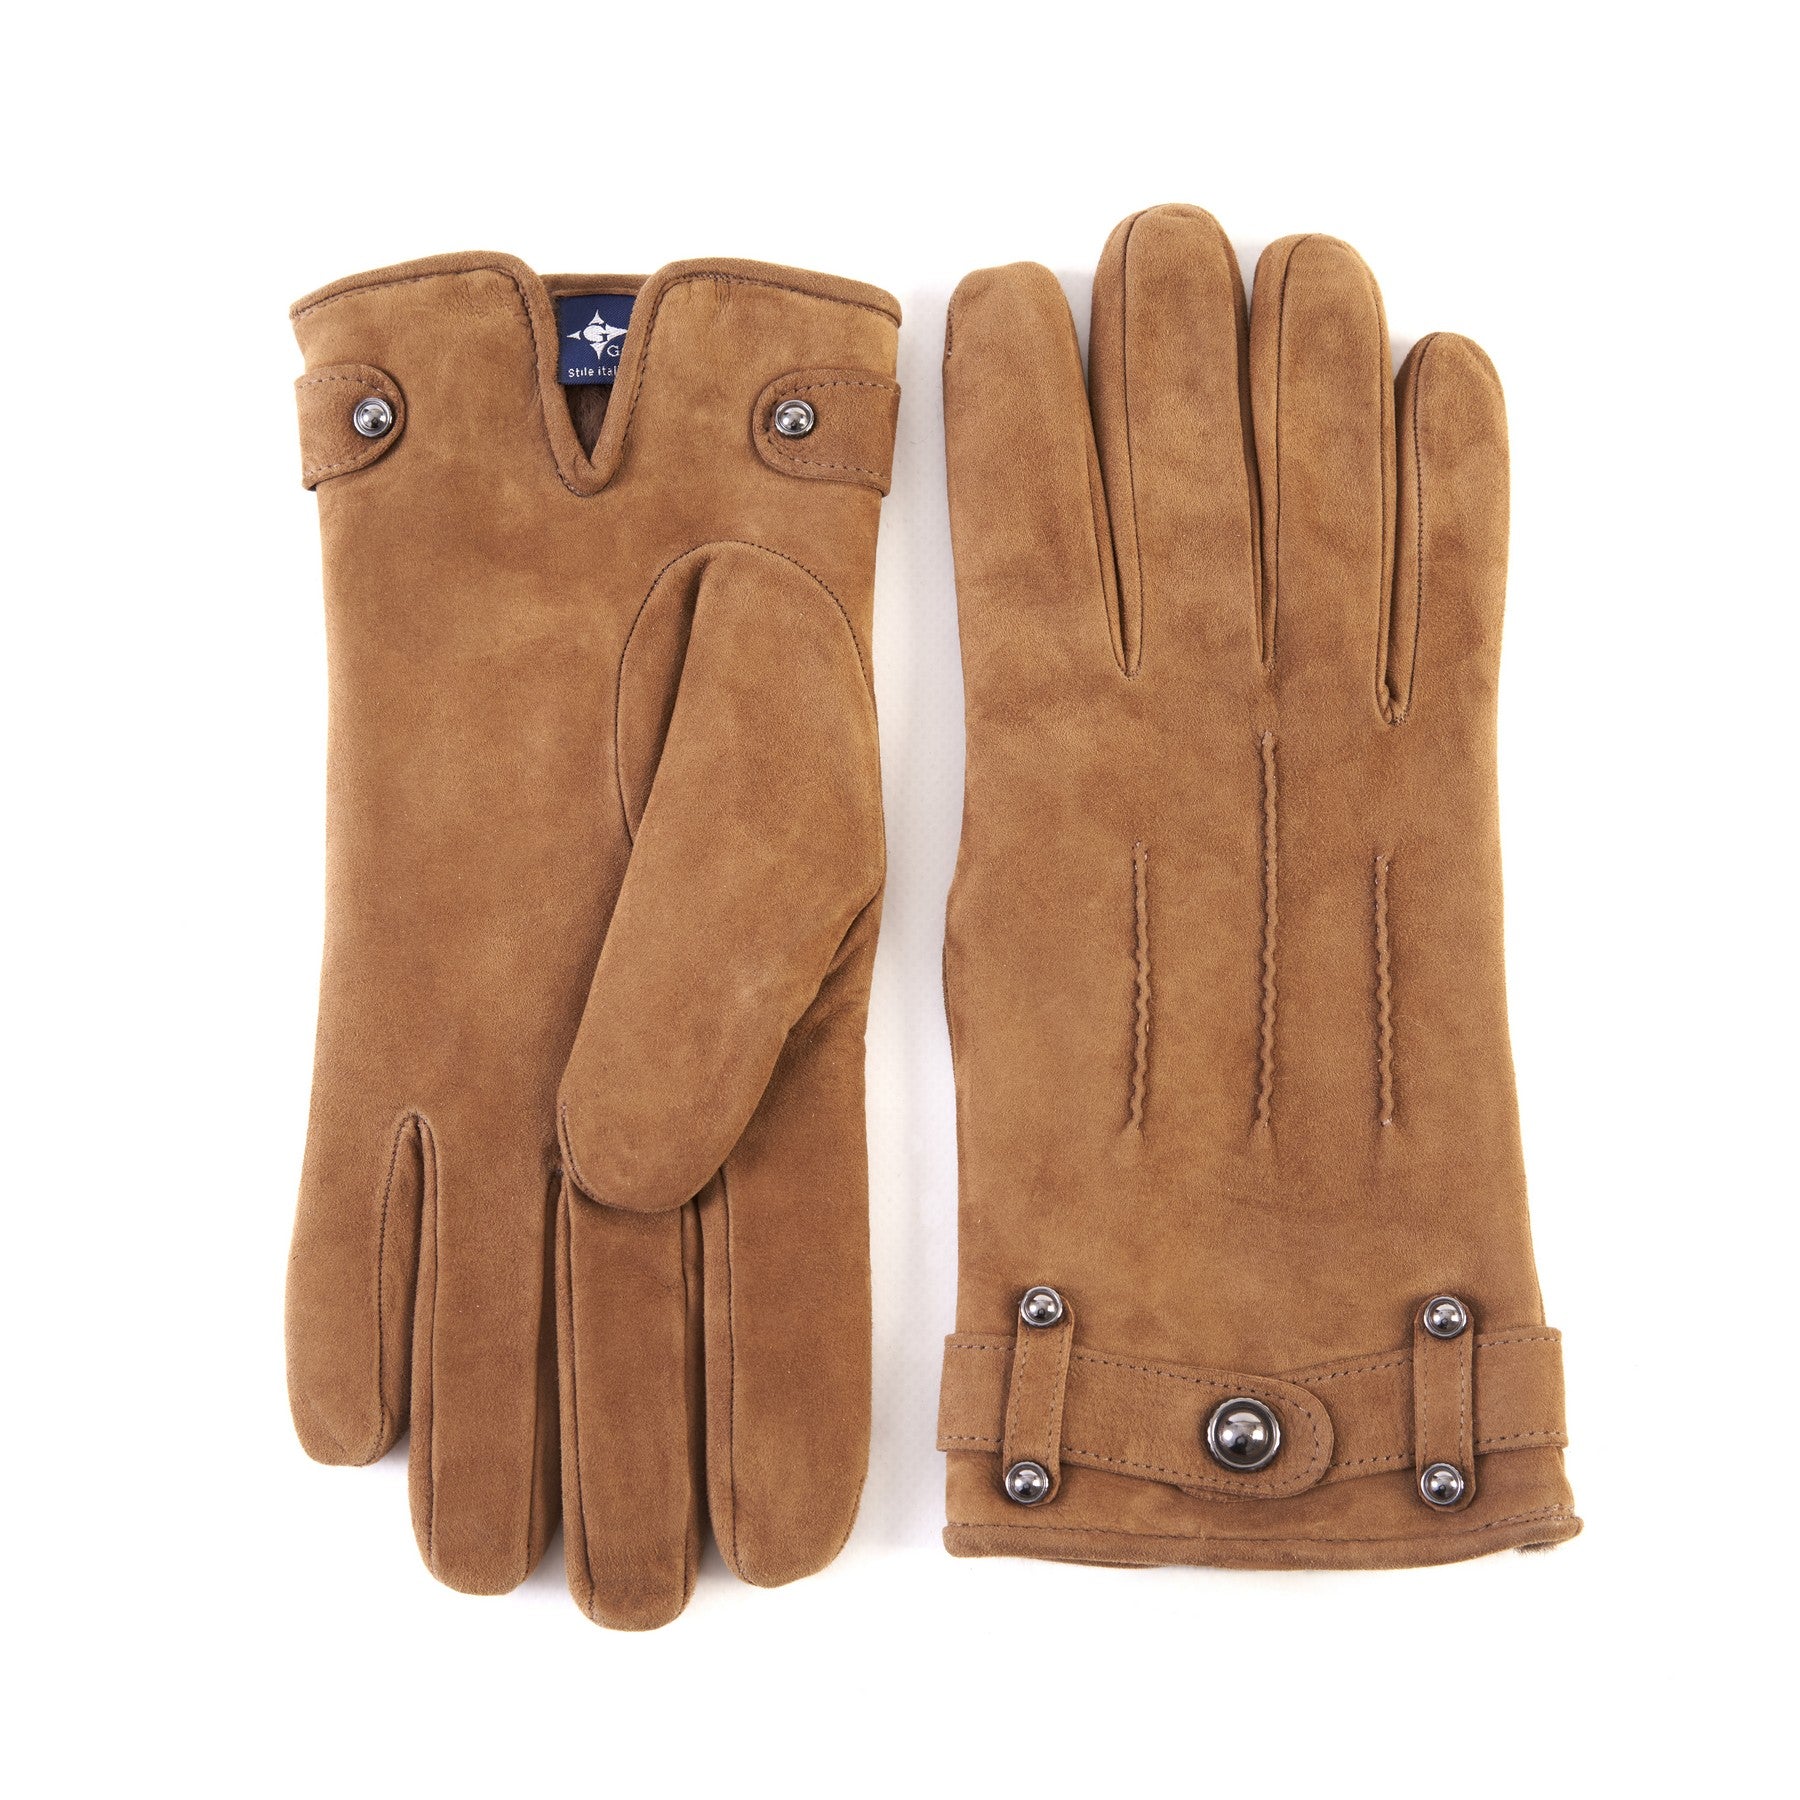 Men's camel suede leather gloves with strap and cashmere lining